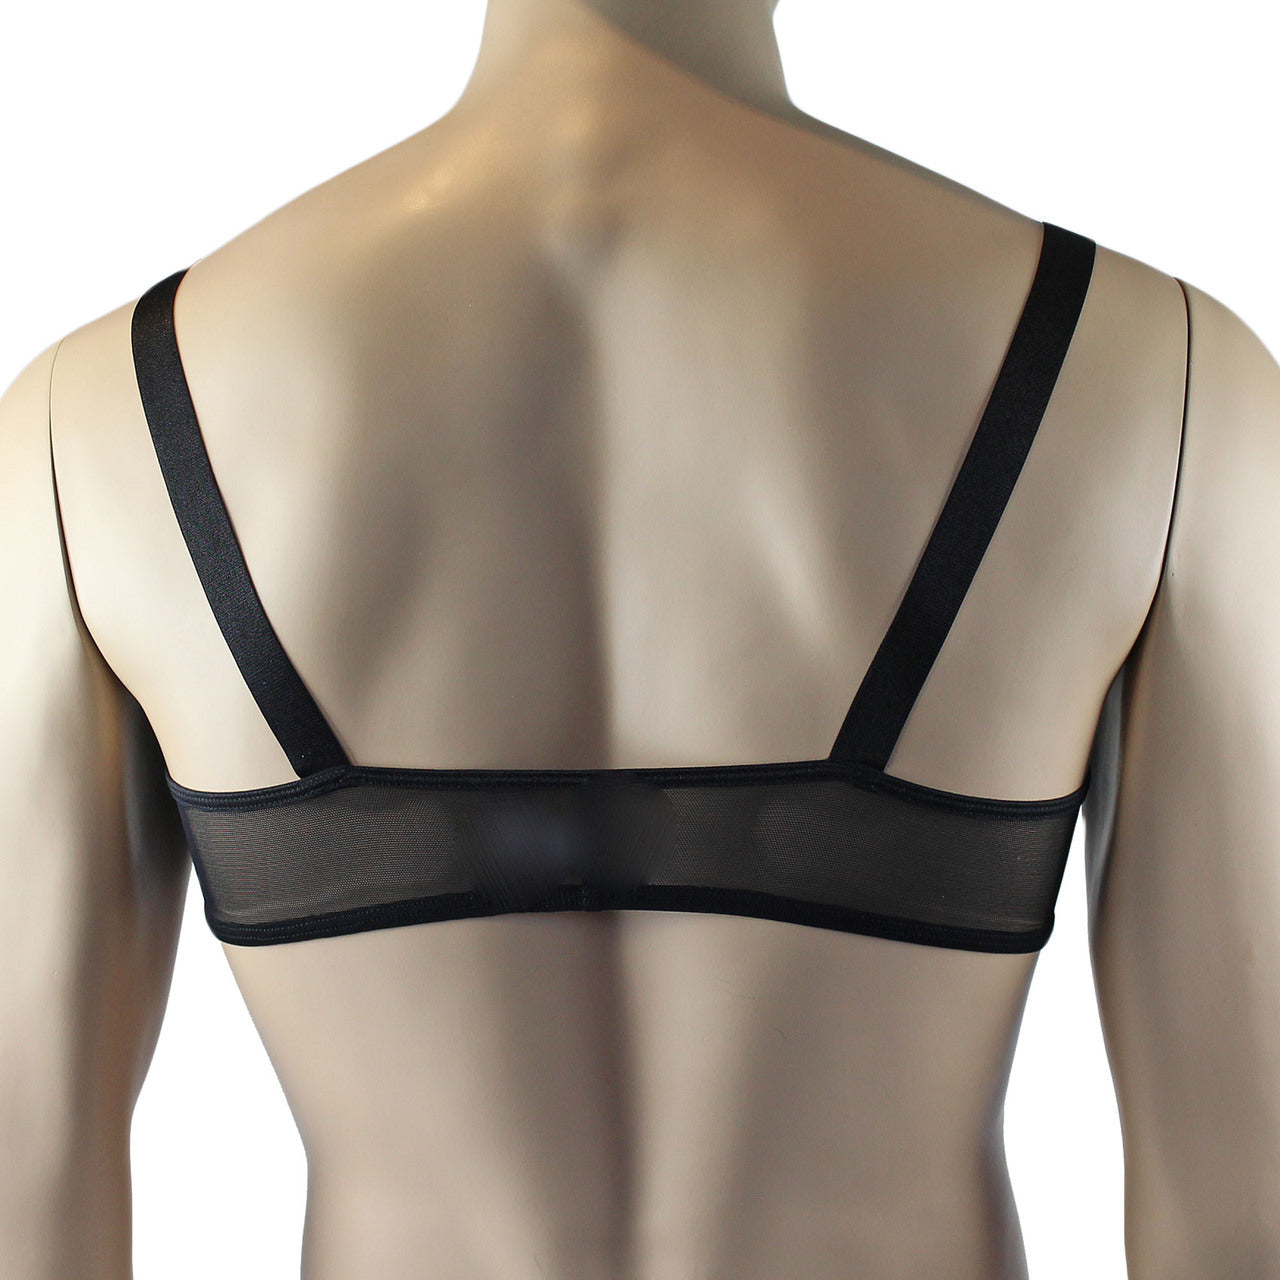 Mens Exotic Sheer Mesh Bra Top & G string - Sizes up to 3XL (black plus other colours)